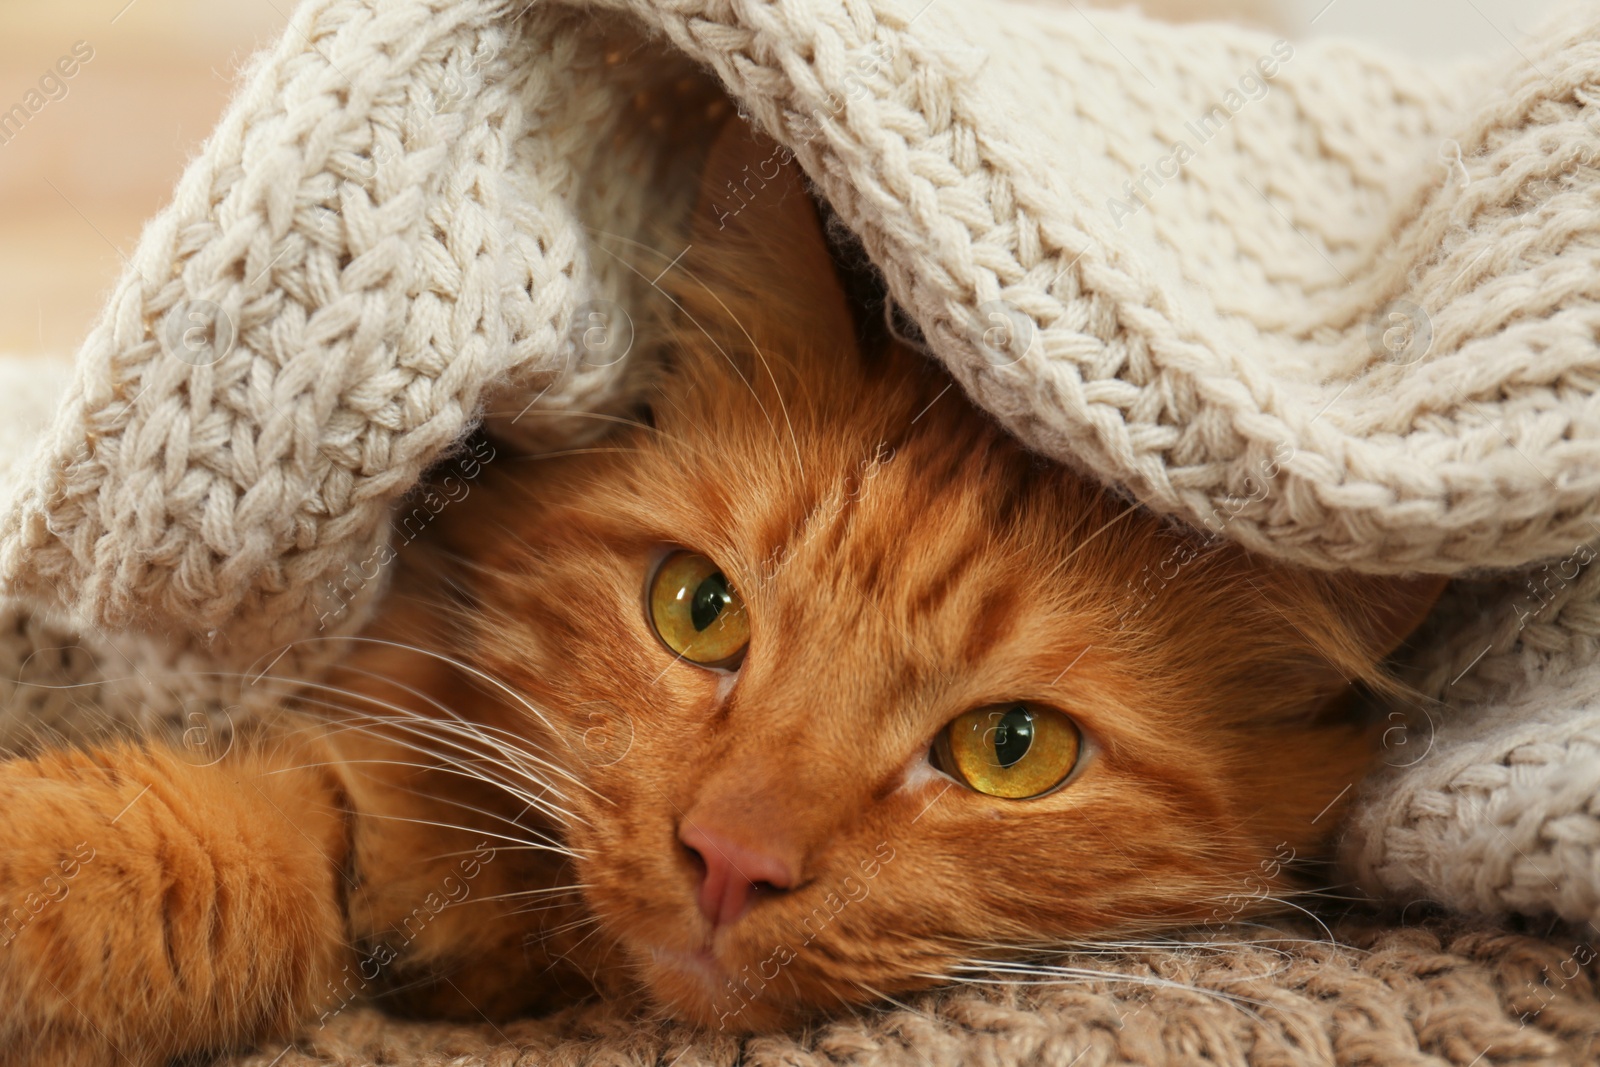 Photo of Adorable ginger cat under plaid at home. Cozy winter